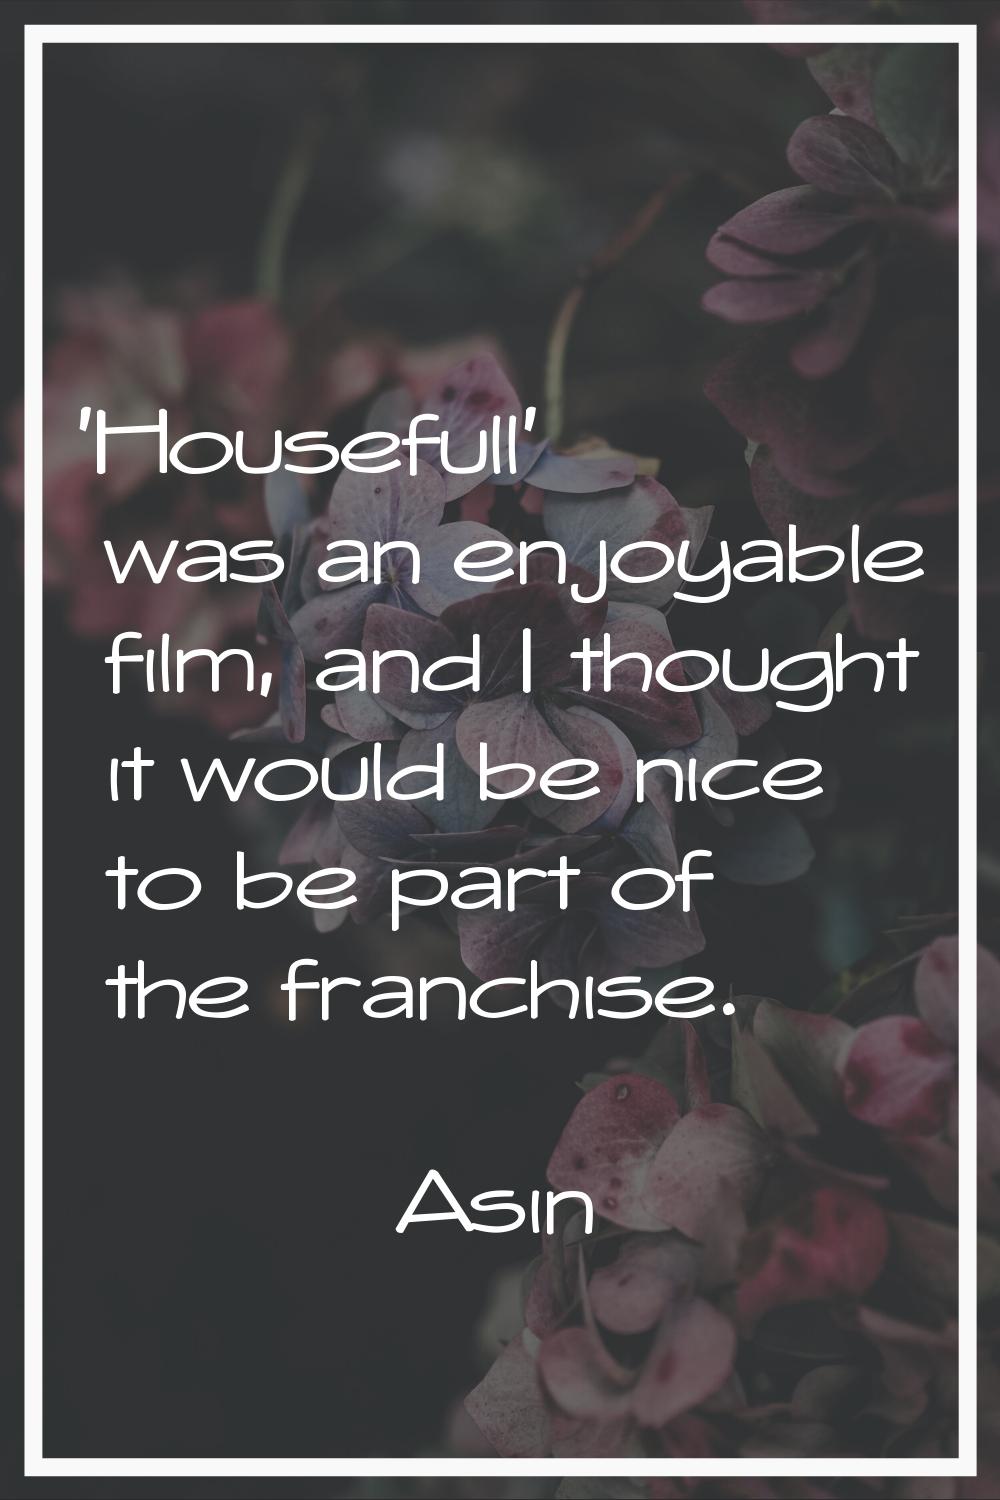 'Housefull' was an enjoyable film, and I thought it would be nice to be part of the franchise.